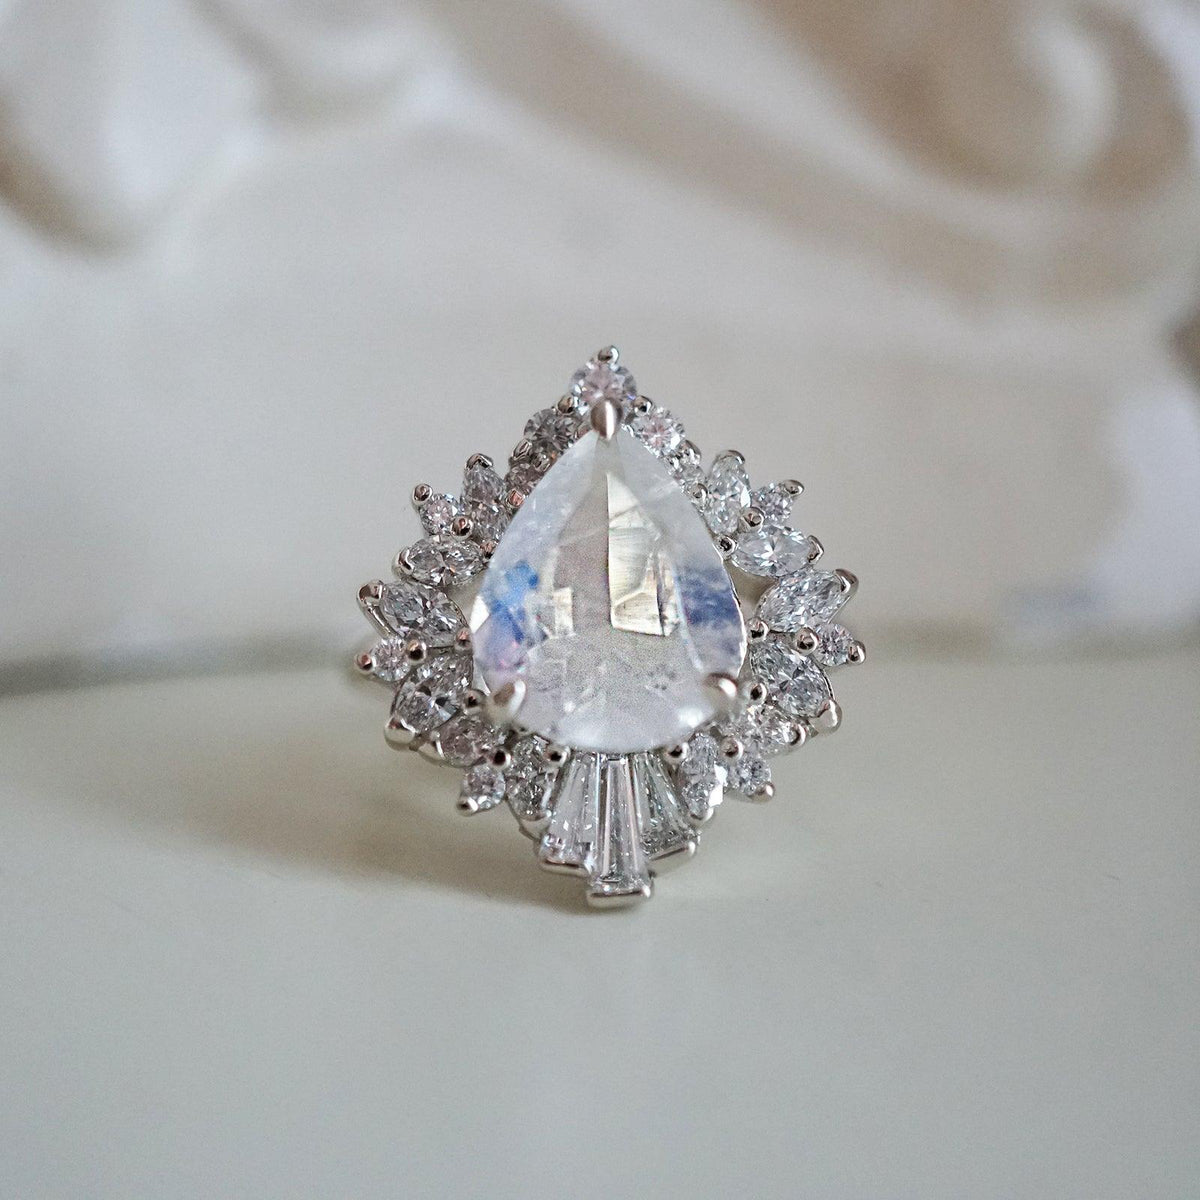 Hall Of Mirrors Moonstone Diamond Ring in 14K and 18K Gold